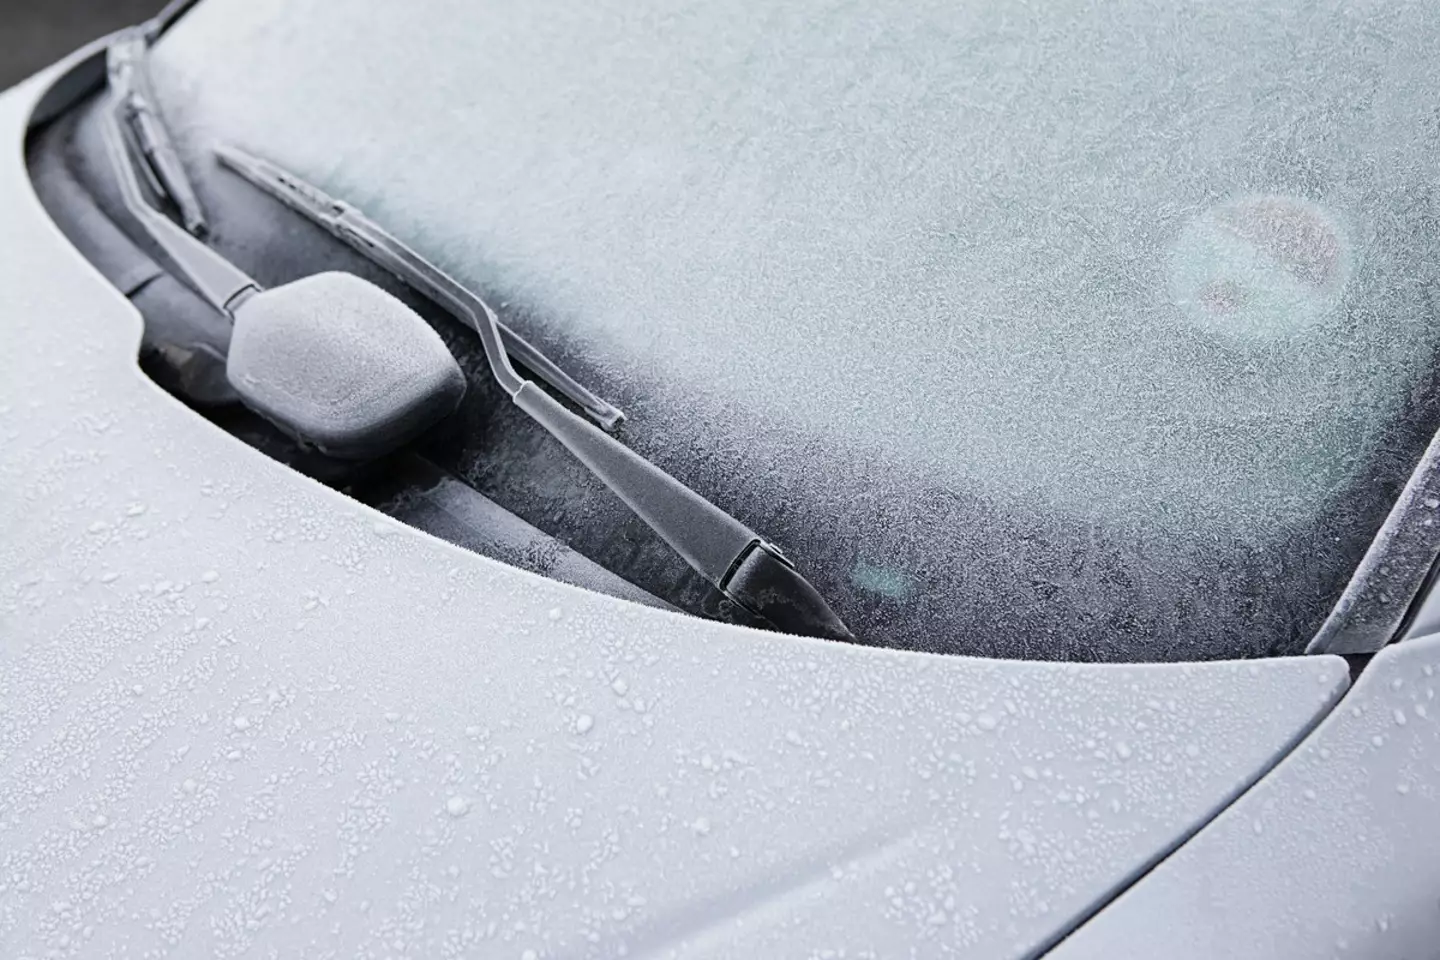 If you don't want to scrape it at least make sure you're not using a hack which could shatter your windscreen.